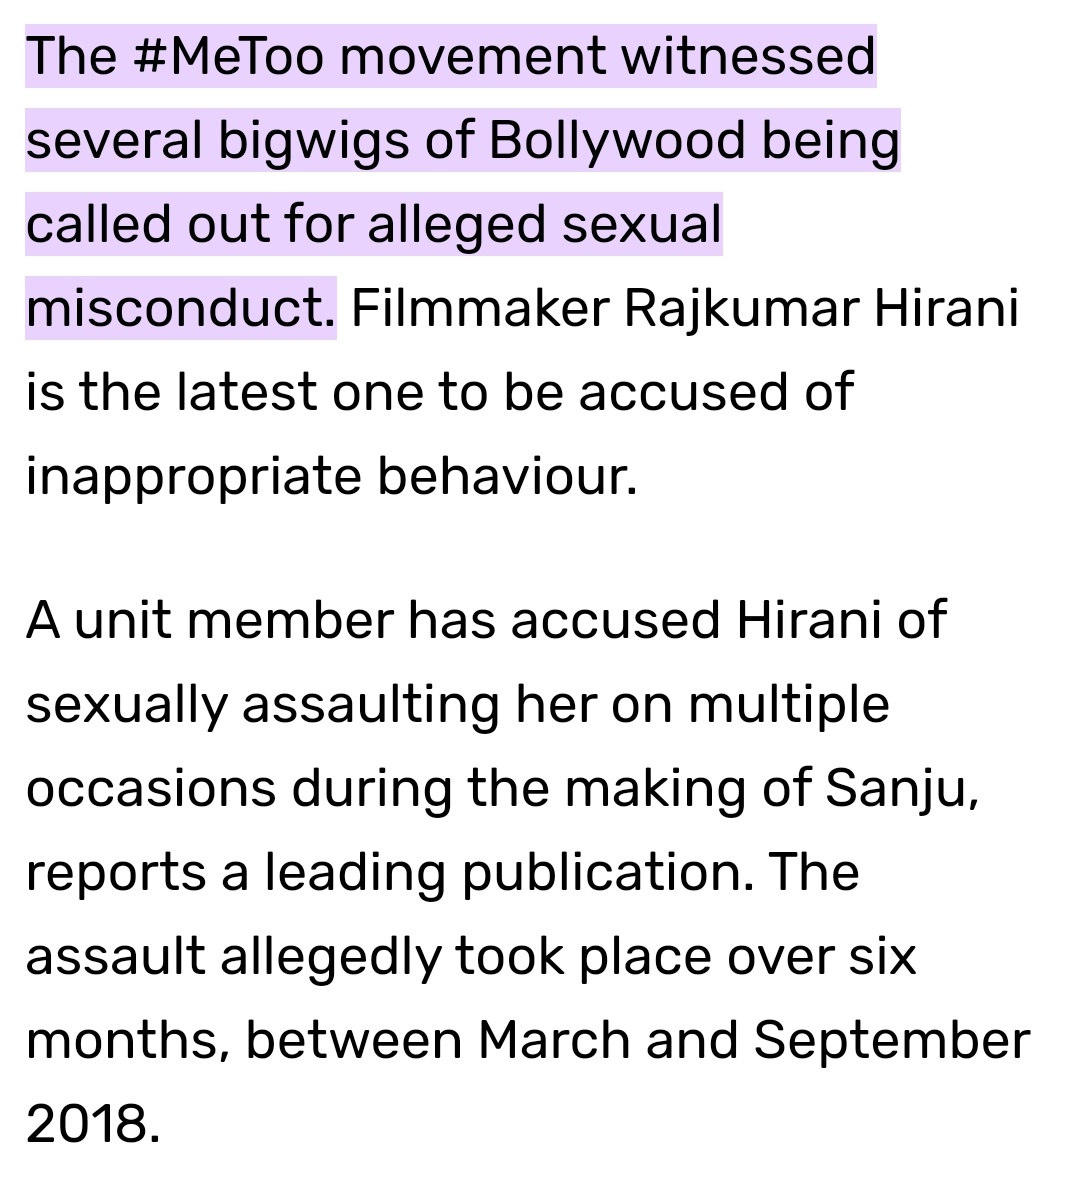 #RajkumarHirani is accused of sexually assaulting a crew member at the time of #Sanju movie sets...

After that allegations #Bollywood
Boycotted hirani. Even #Munnabhai3 project is put on hold..

But legend #SRK𓃵 gave the sexual abuser a new life  with #Dunki ...

Still no